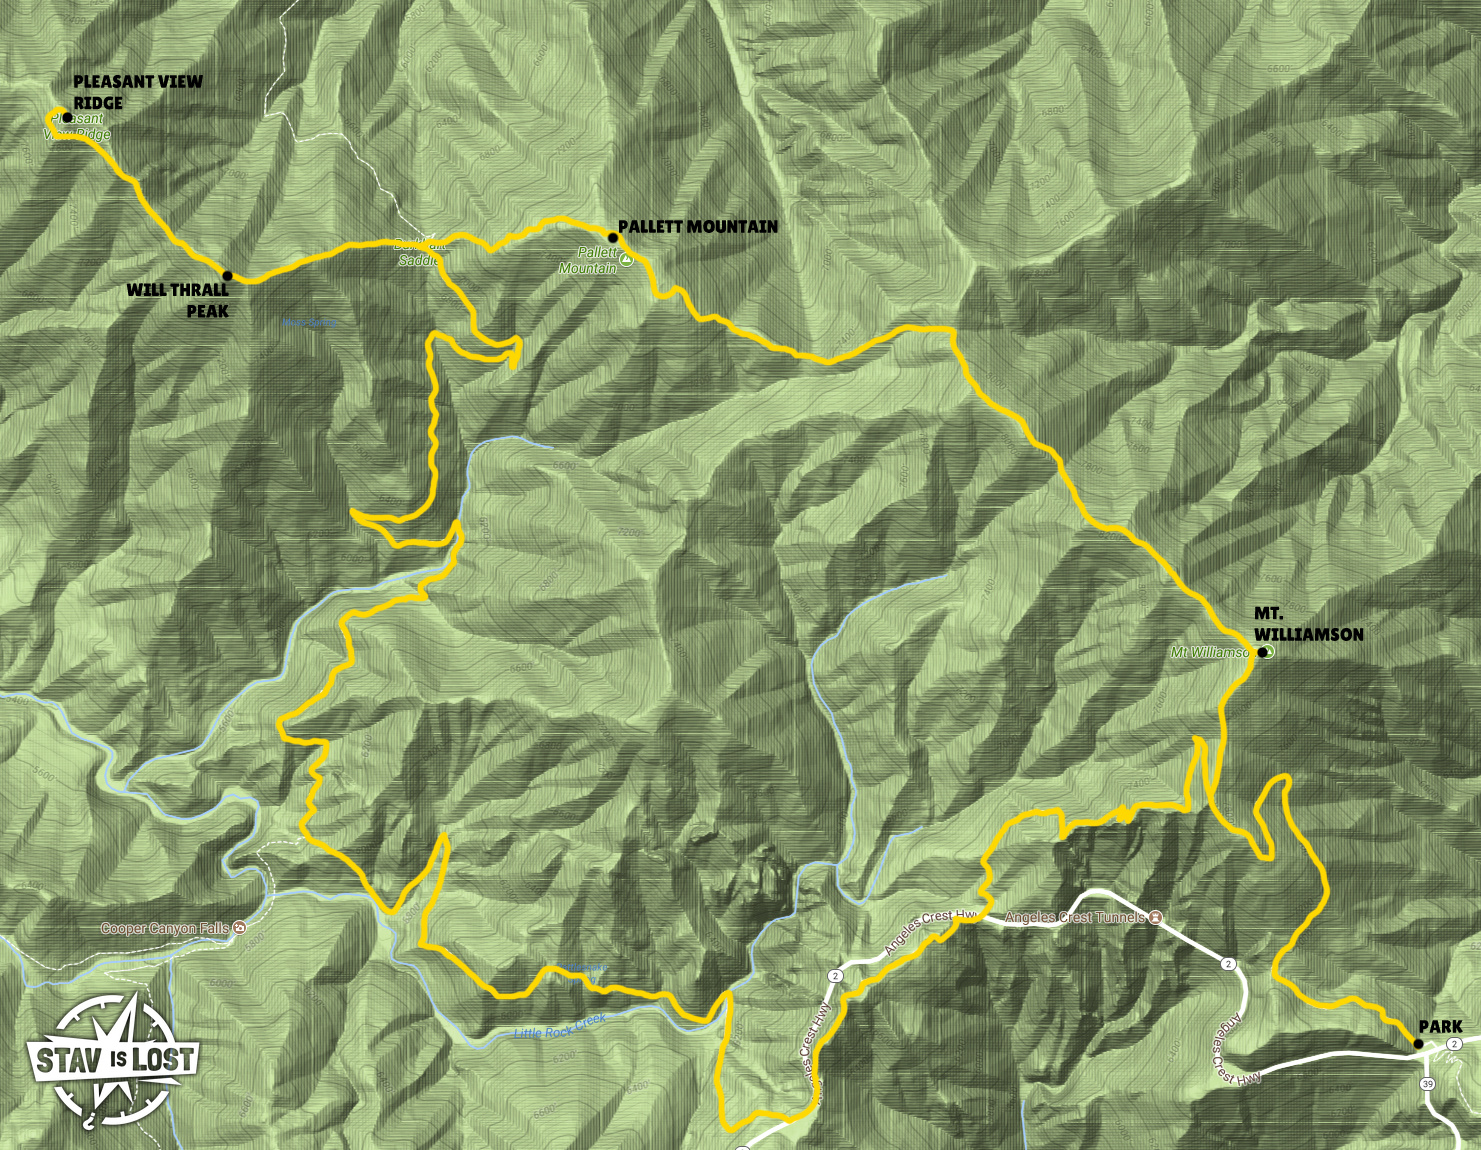 map for Mount Williamson, Pleasant View Ridge, and Little Rock Creek Loop by stav is lost